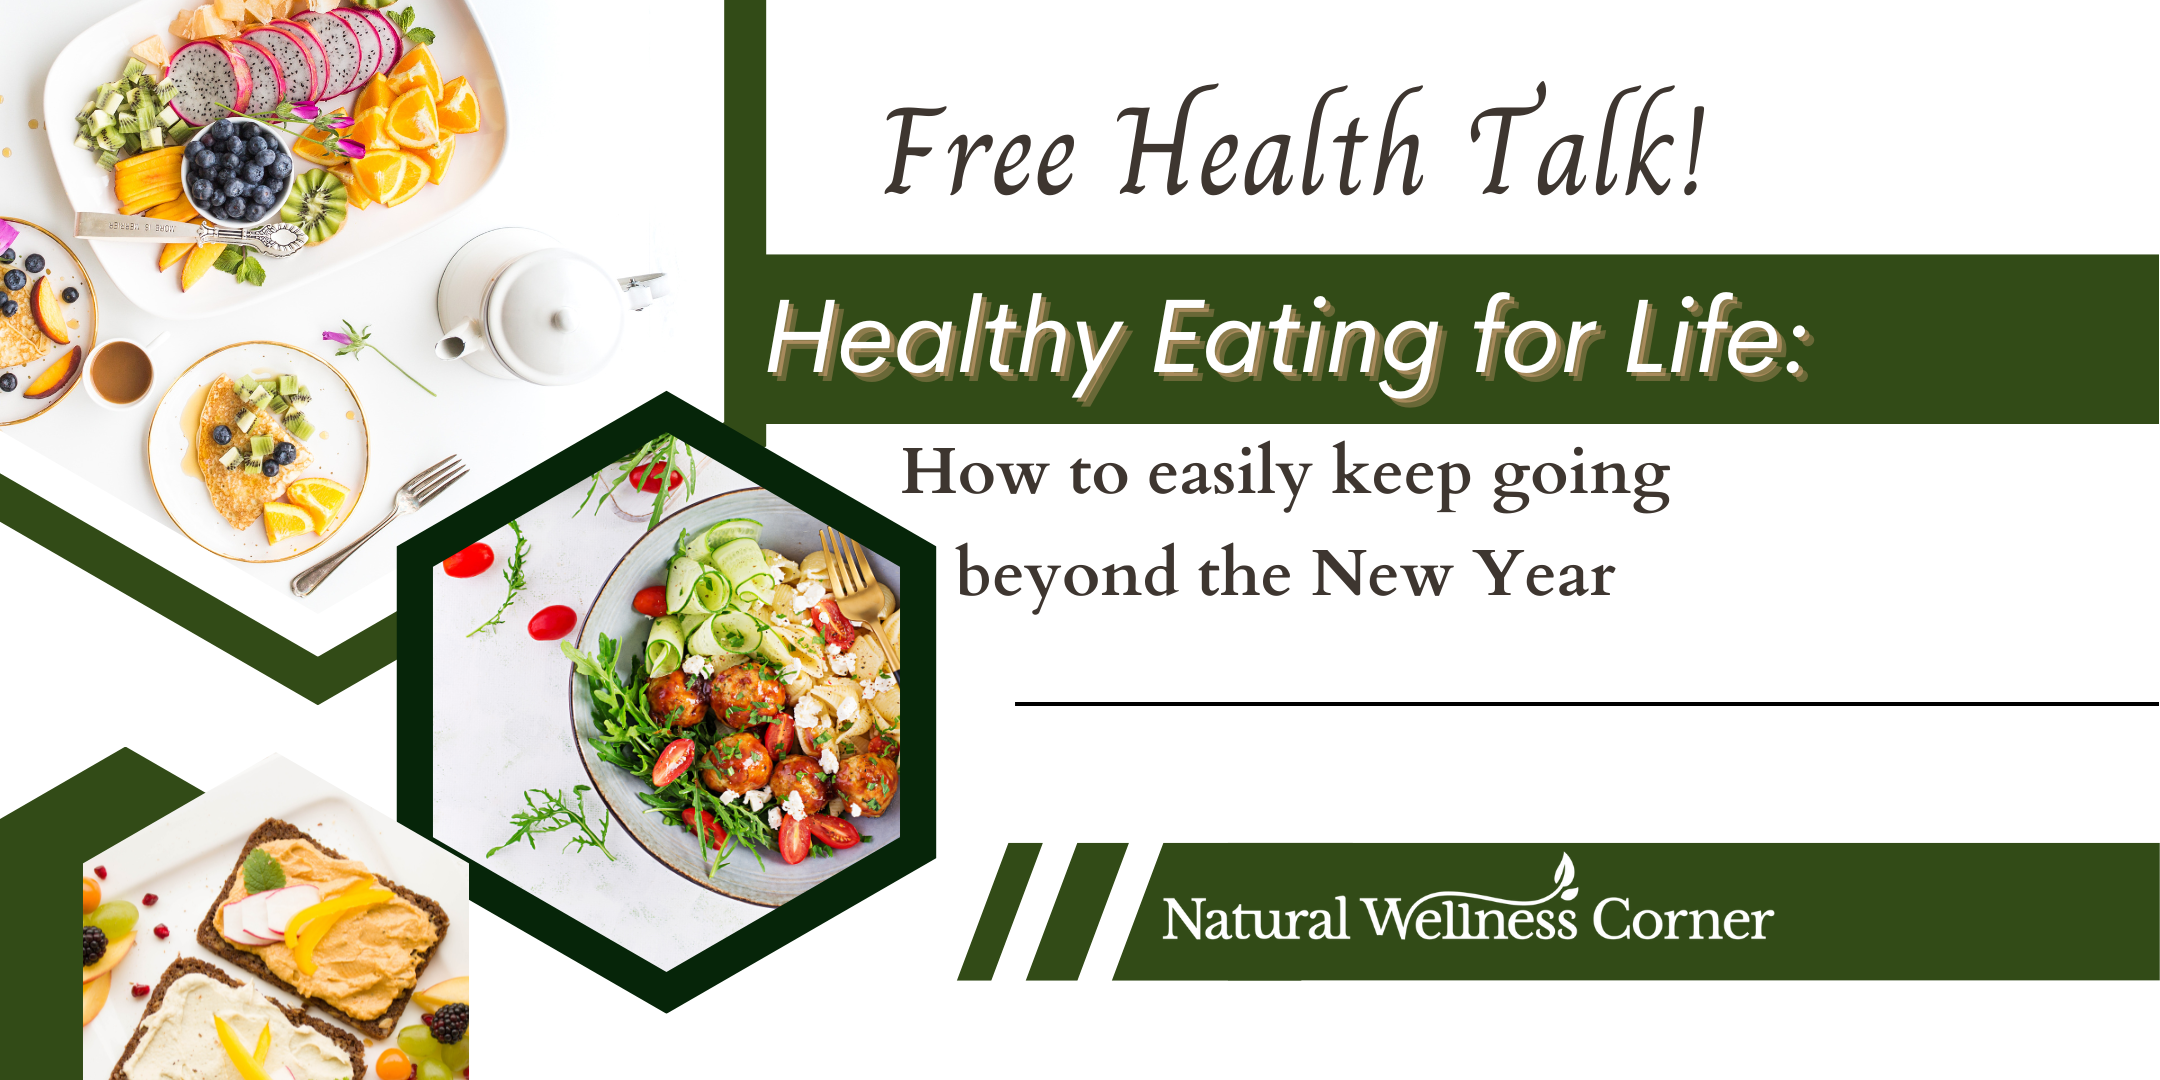 Healthy Eating for Life: How to Keep Going Beyond the New Year